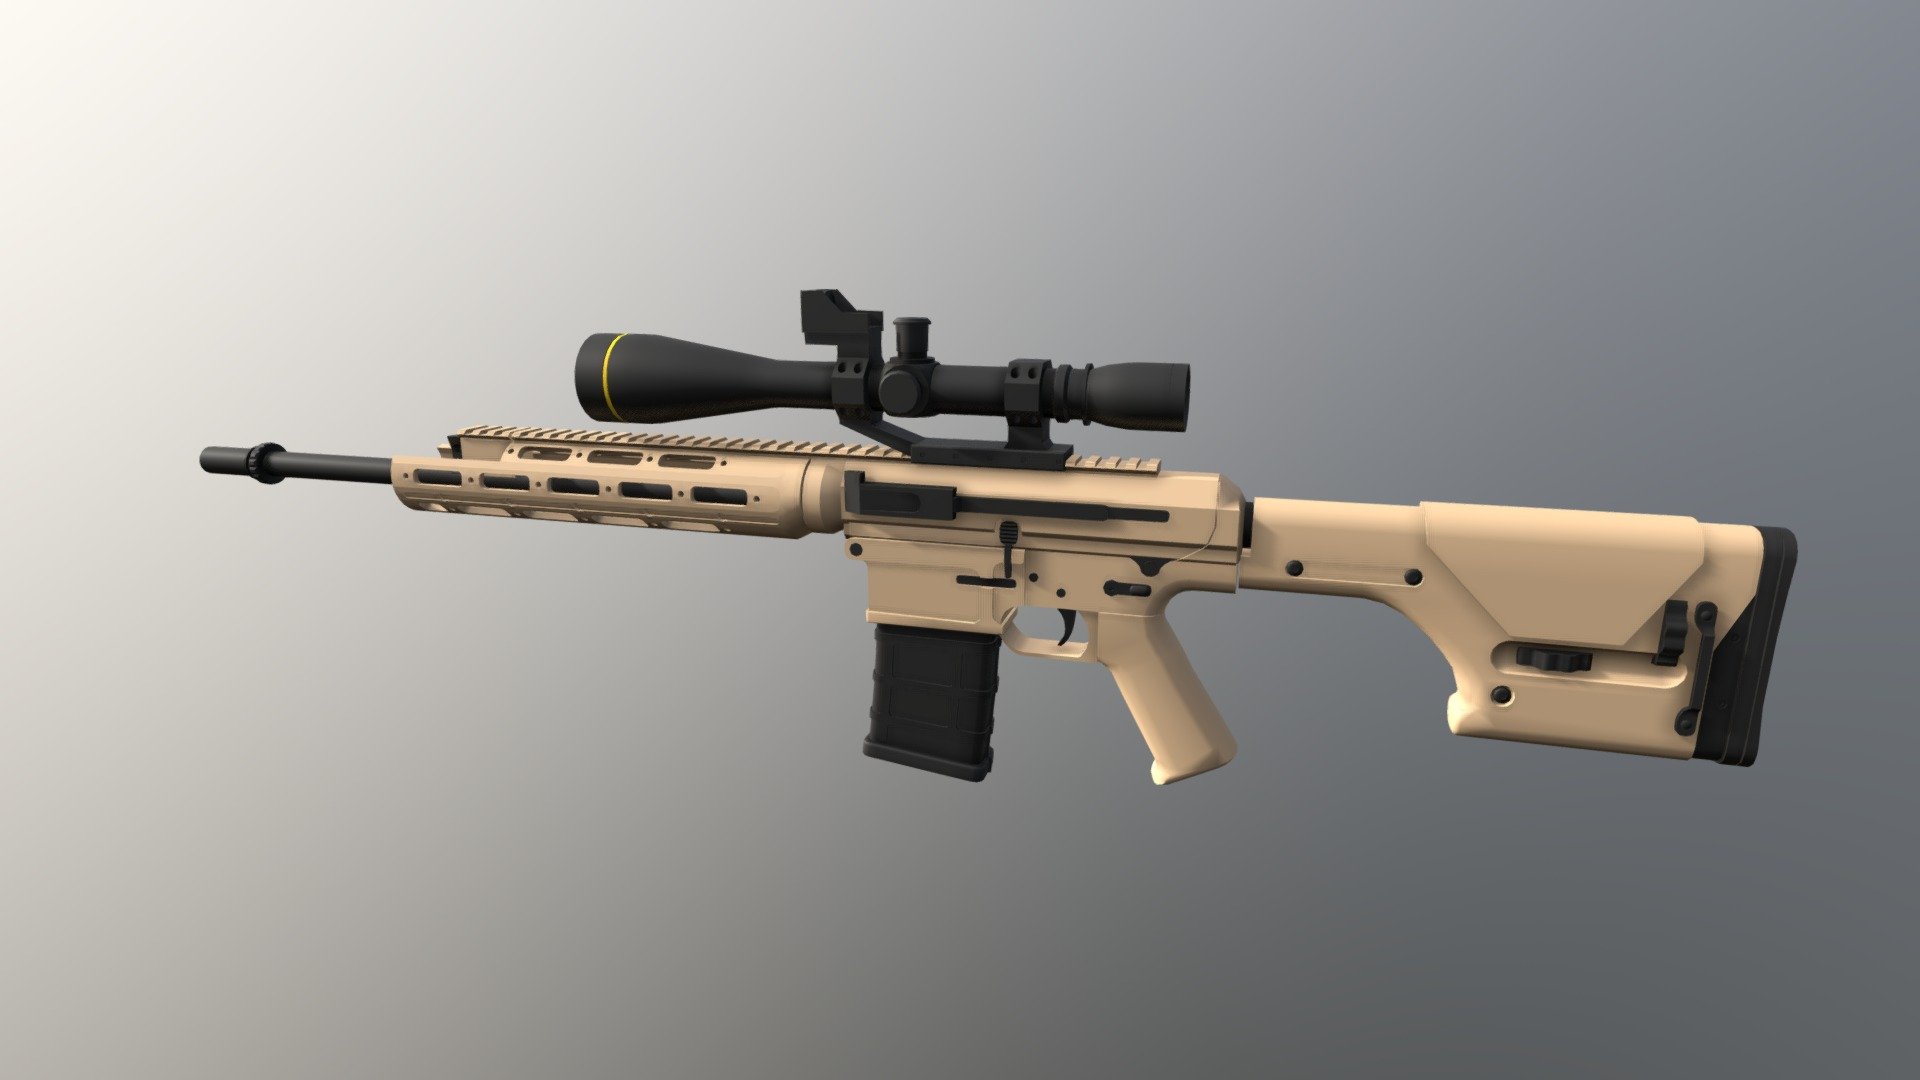 Modelled this Remington RSASS sniper/marksman rifle as part of a modding project for the Project Nas mod for Ravenfield.

Credit would be appreciated 3d model